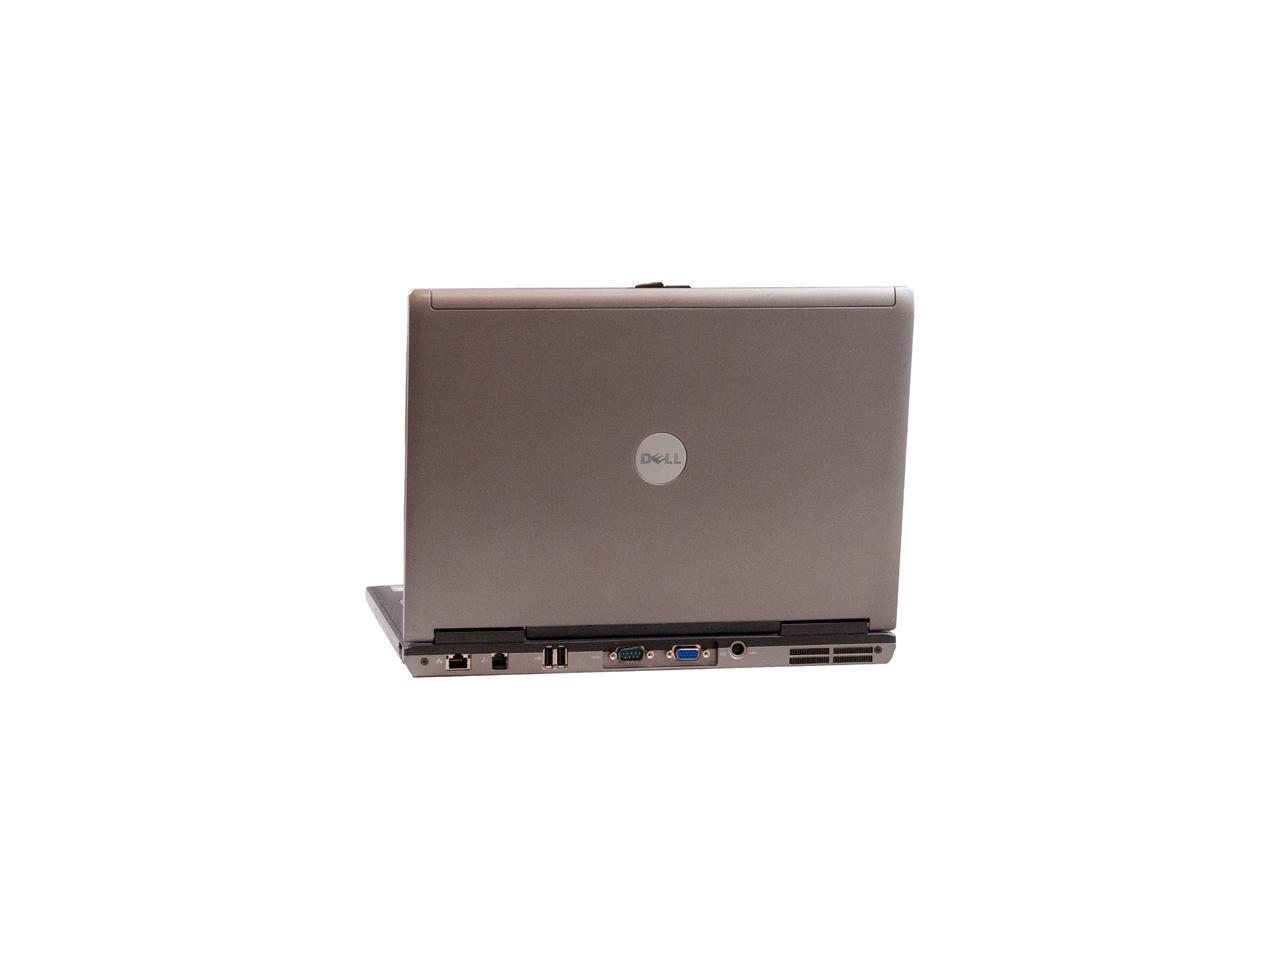 Refurbished: DELL Laptop D620 Intel Core Duo 1.66 GHz 2 GB Memory 60 GB